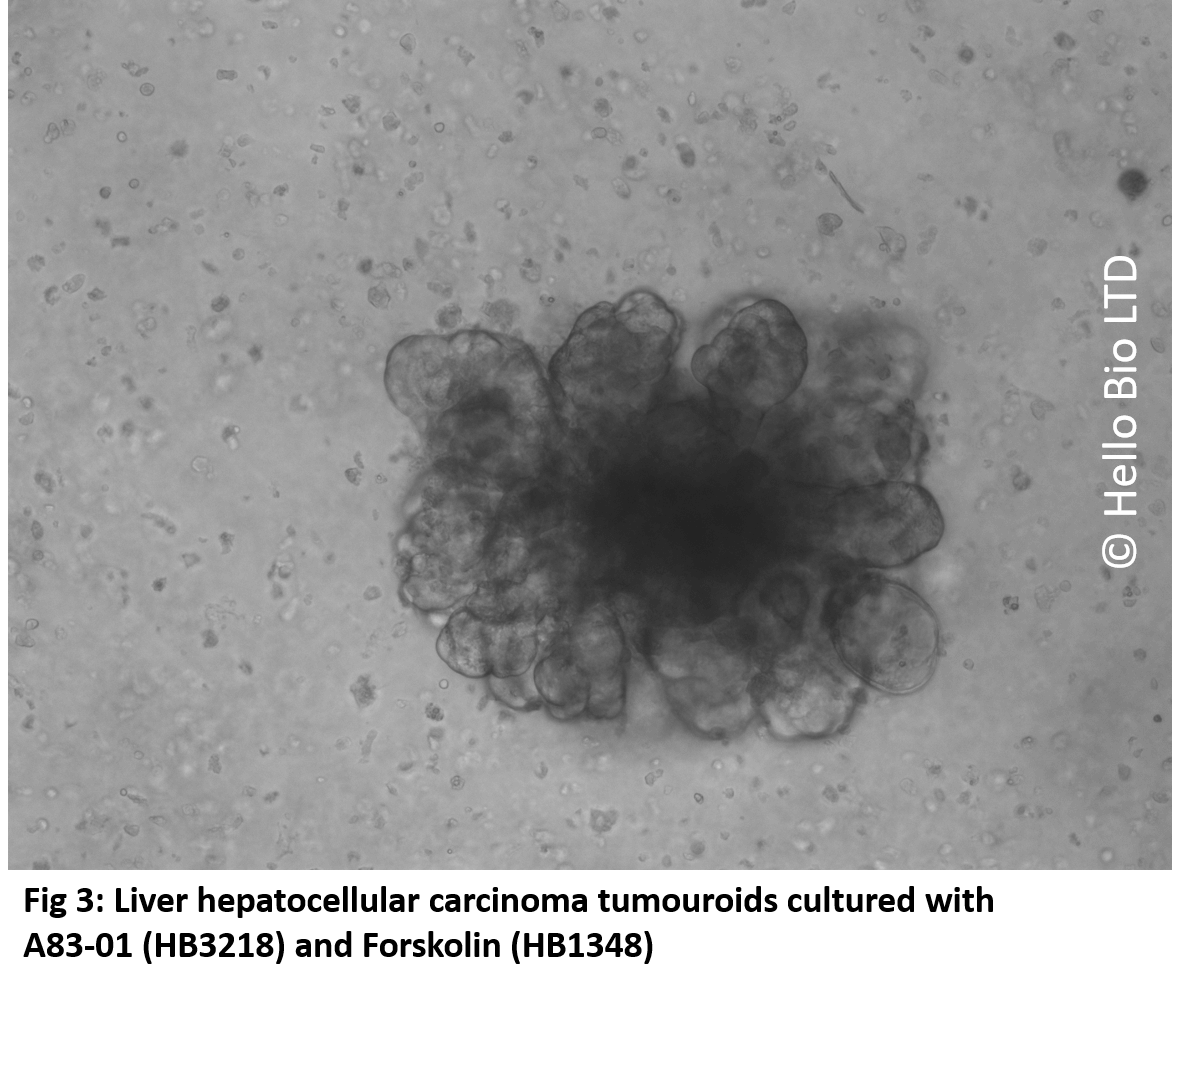 Fig 3 Liver hepatocellular carcinoma tumouroids cultured with A83-01 (HB3218) and Forskolin (HB1348)